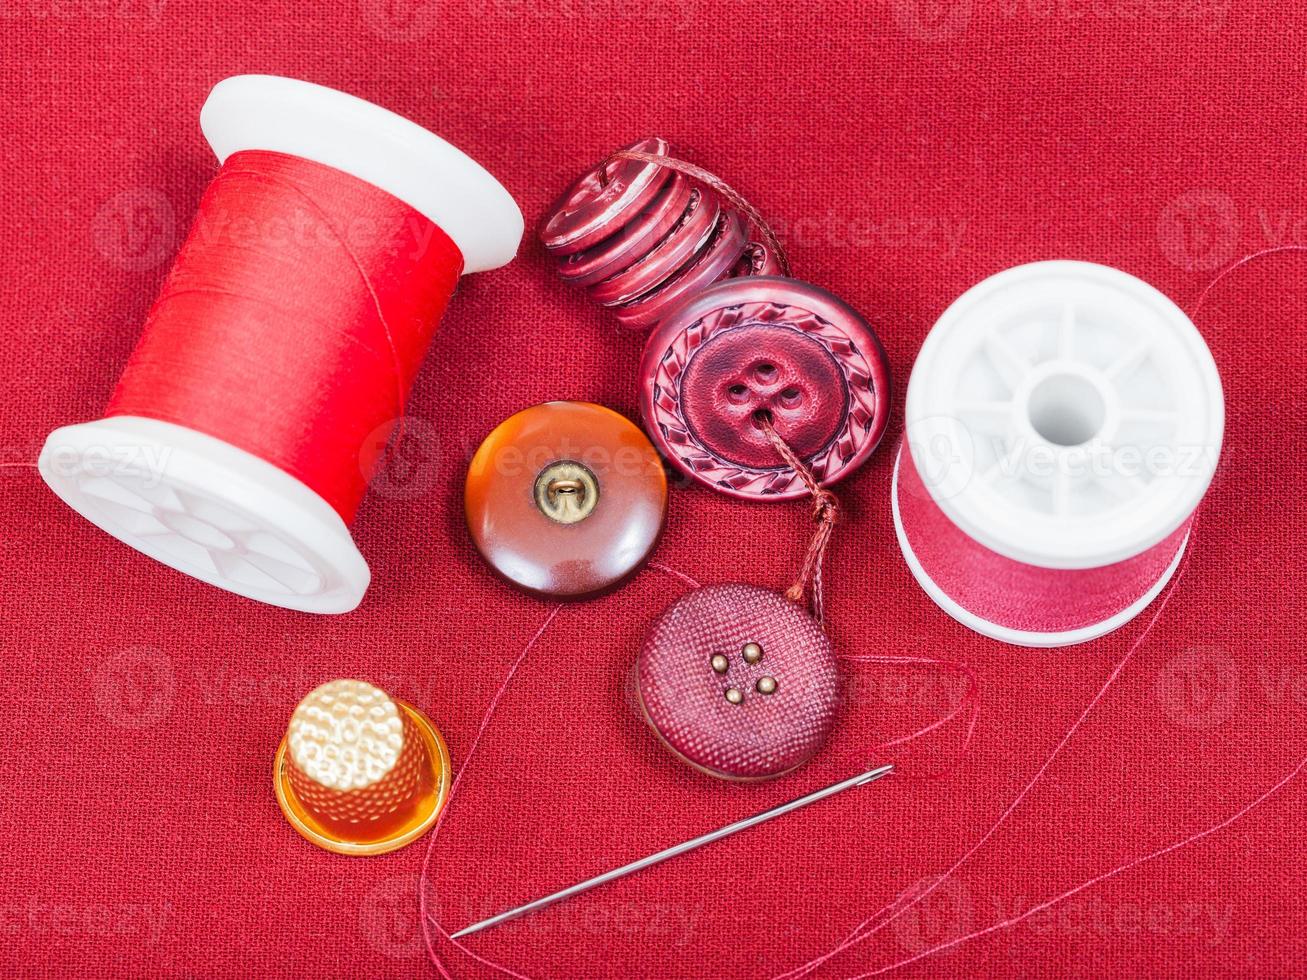 sewing thread, buttons, thimble on red tissue photo